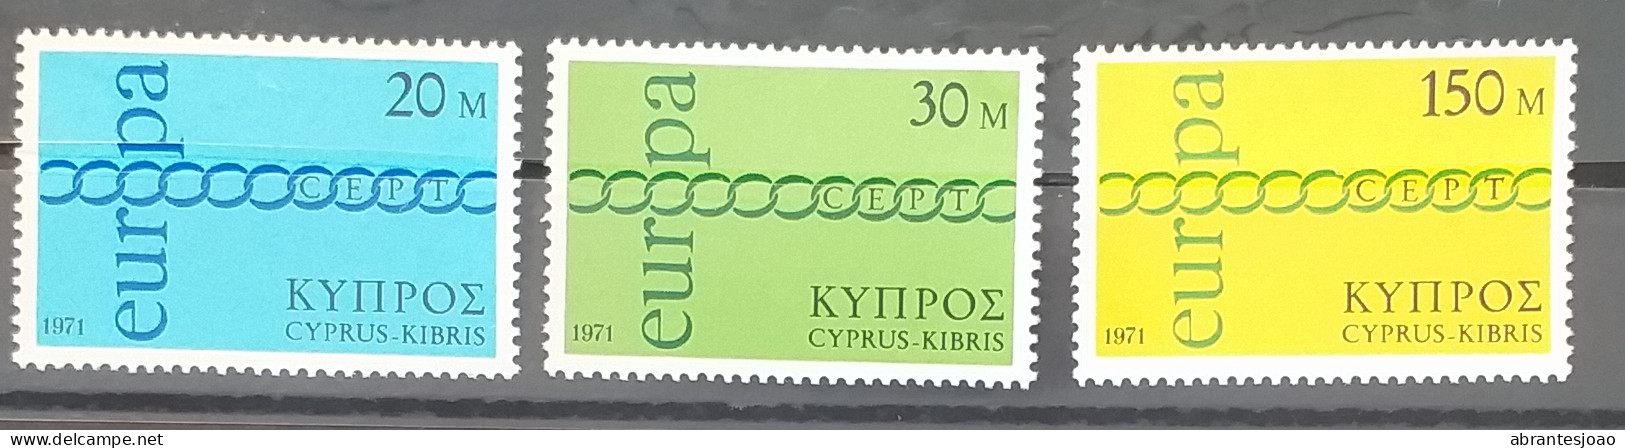 1961 - Cyprus (Republic) - MNH - Europa CEPT + 1969 + 1971 - 9 Stamps - Unused Stamps